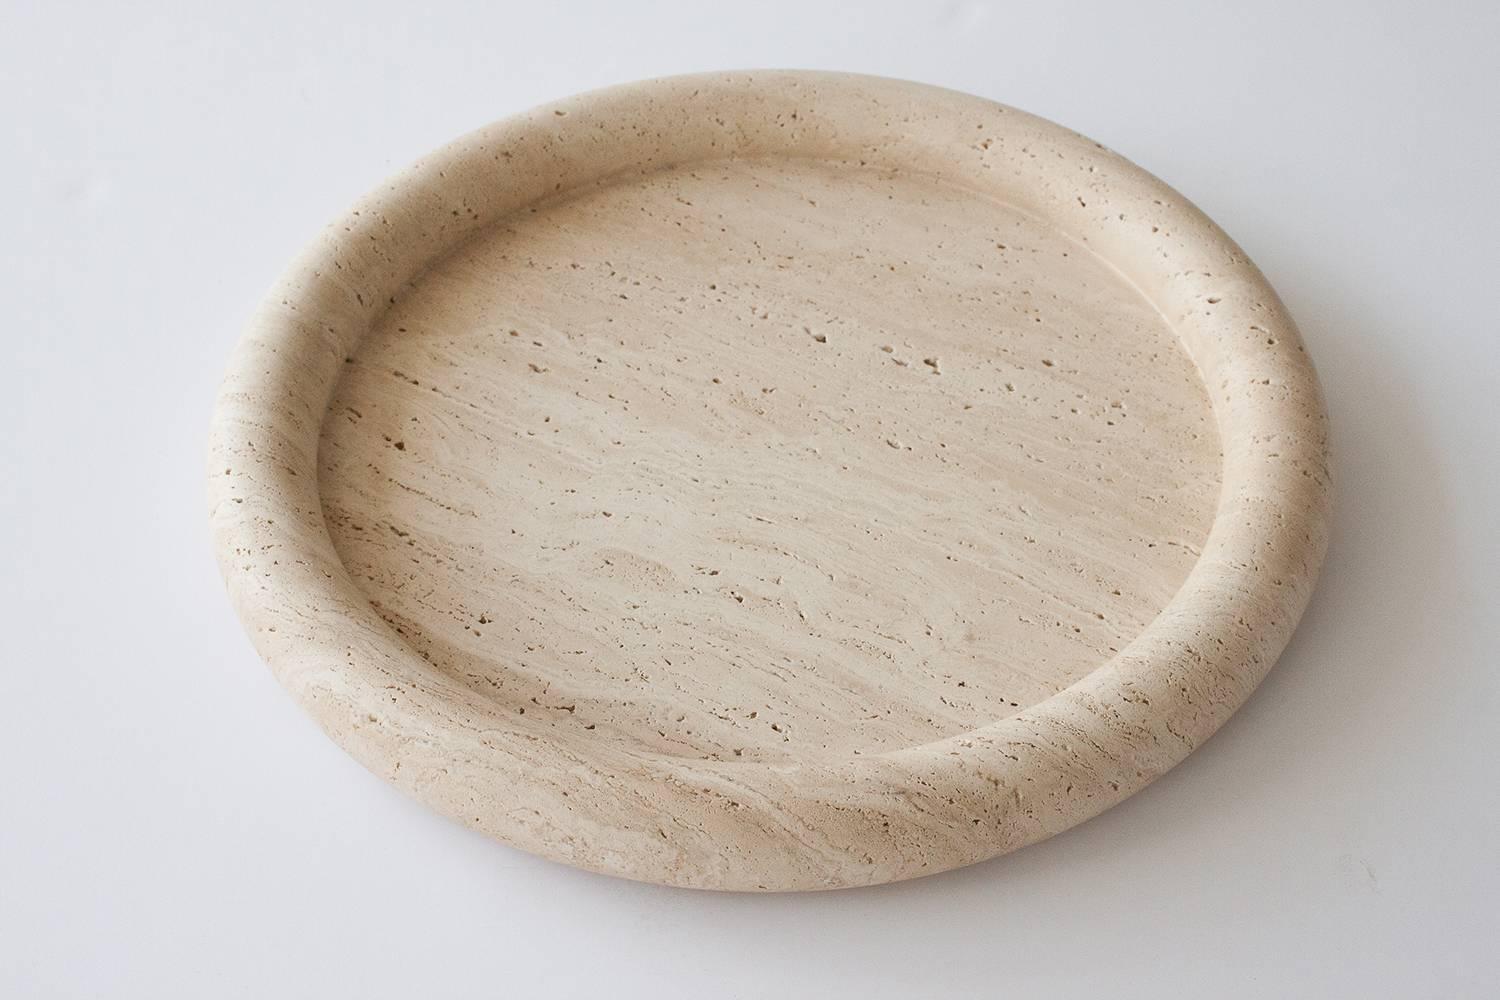 Rare solid travertine centerpiece charger by Egidio Di Rosa and Pier Alessandro Giusti for Up&Up. Excellent condition with natural inclusions within the stone. Unmarked.